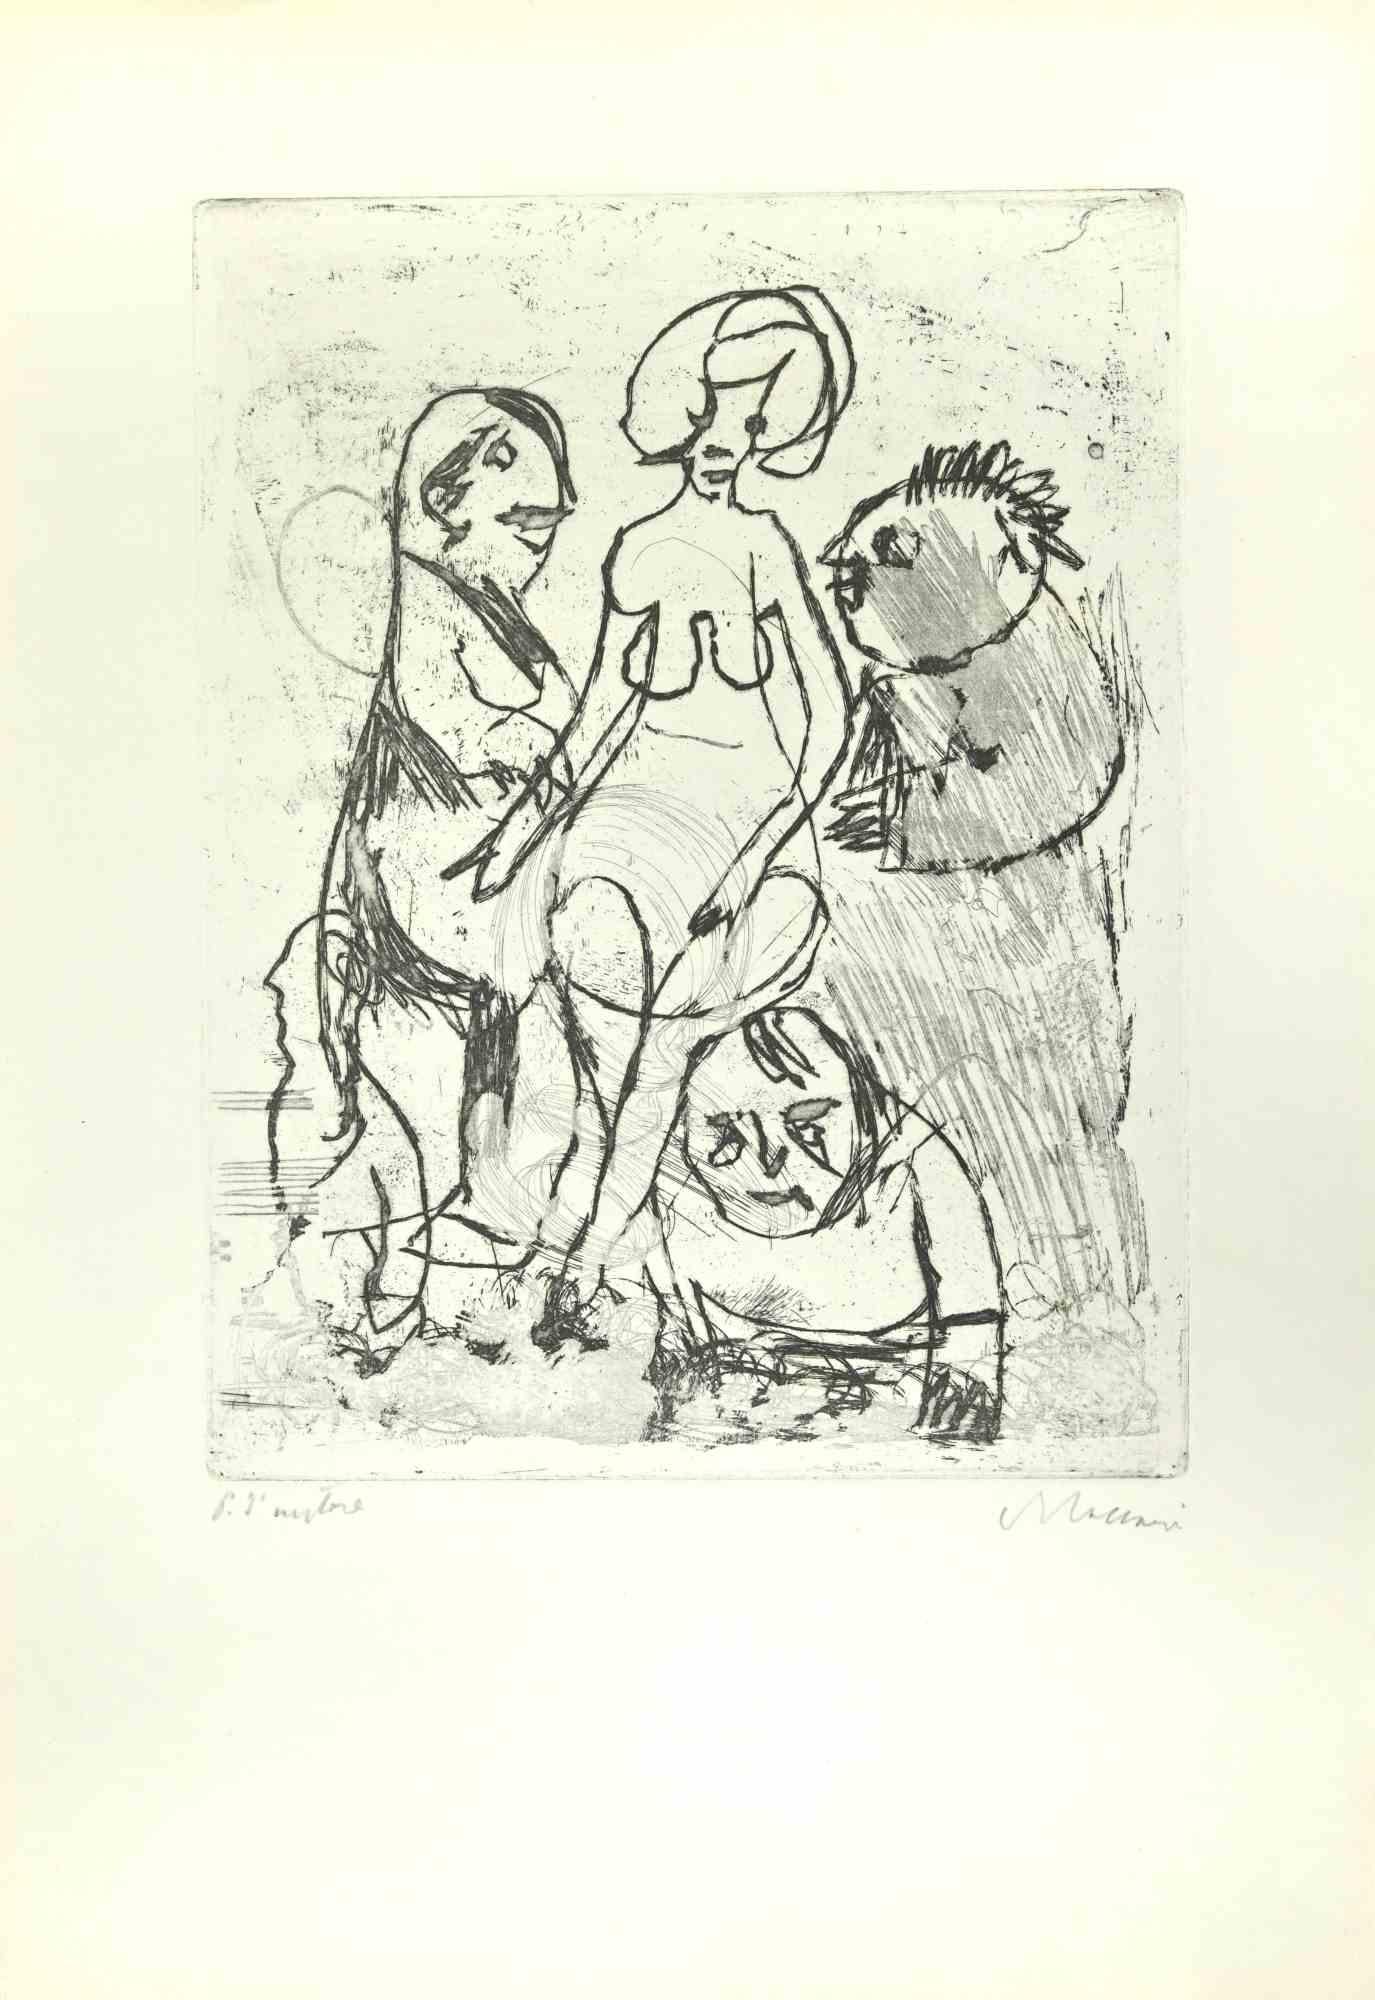 Figures is an Etching and Drypoint realized by Mino Maccari in the Mid-20th Century.

Hand-signed in the lower right part.

Artist's proof.

Good conditions.

Mino Maccari (Siena, 1924-Rome, June 16, 1989) was an Italian writer, painter, engraver